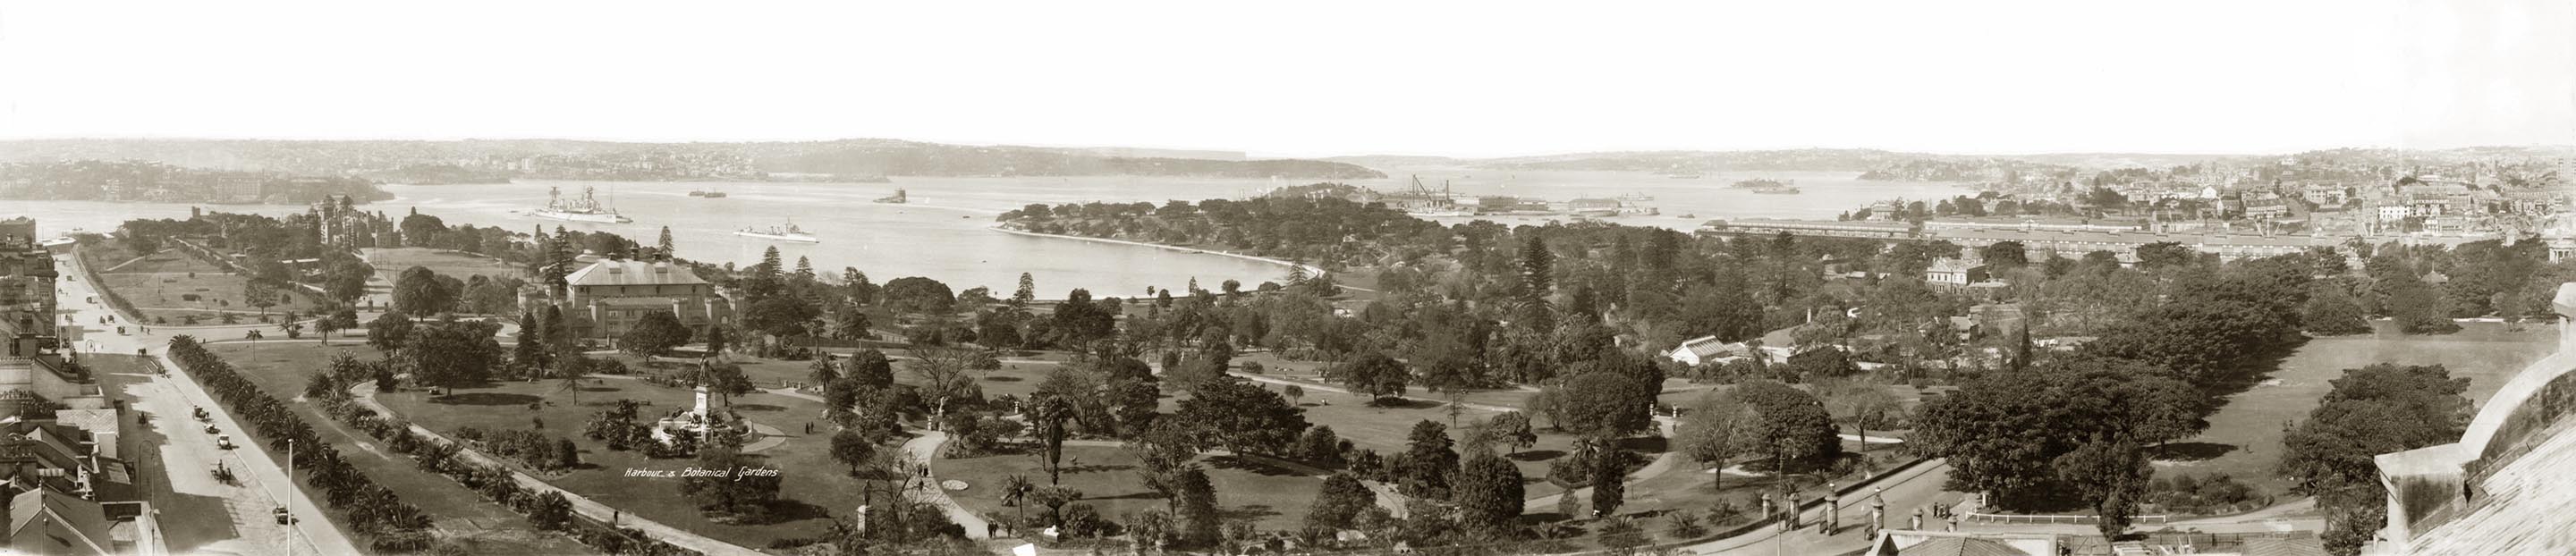 Sydney from a building overlooking the Royal Botanic Gardens and Farm Cove, c1920